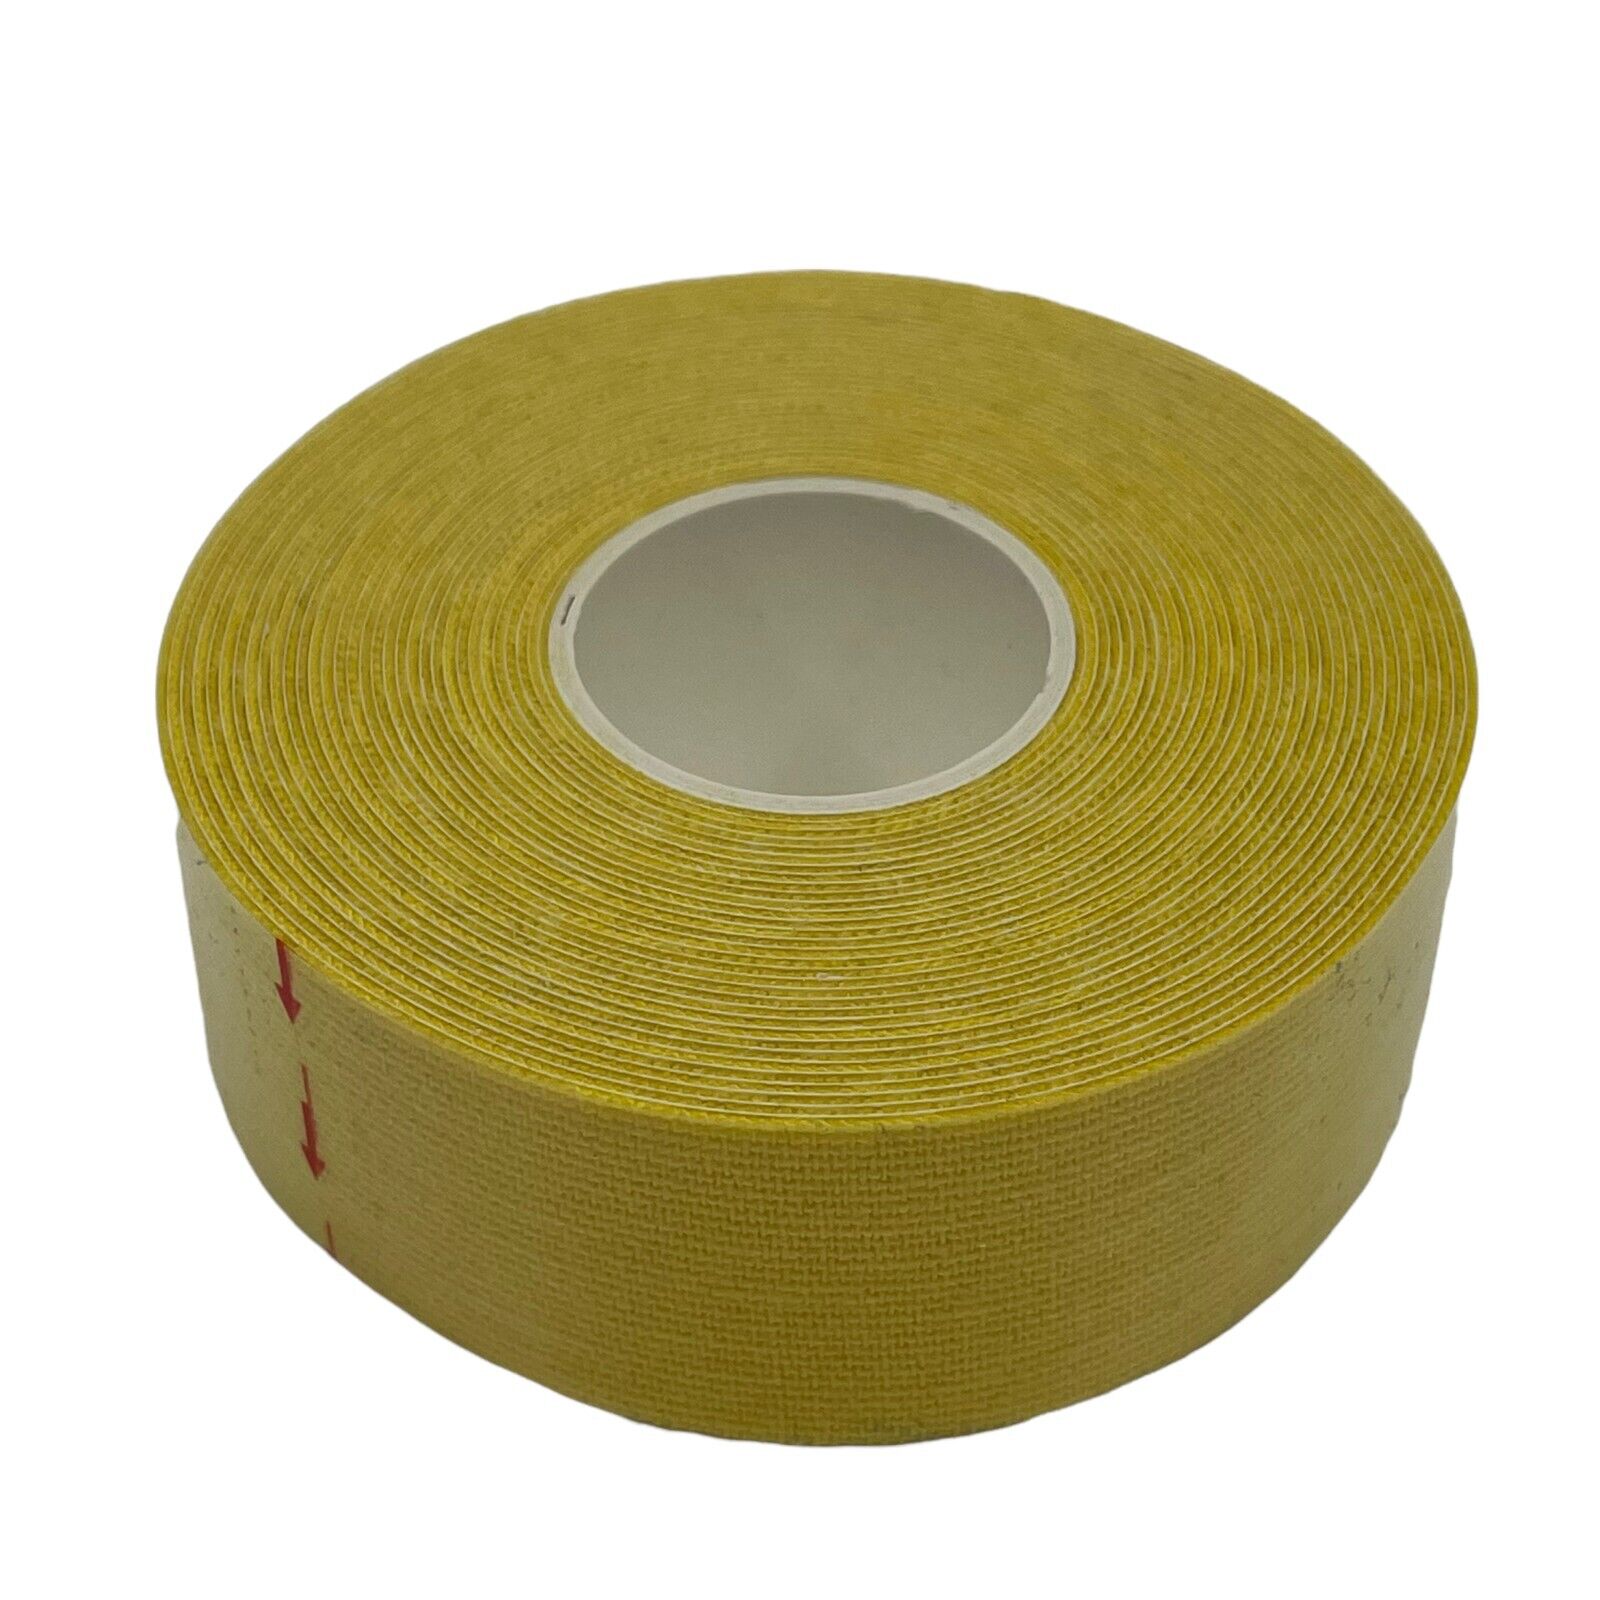 Wholesale Lot x 6 Rolls of Bowling Thumb Finger Hada Patch Protection Tape Unbranded Does Not Apply - фотография #9